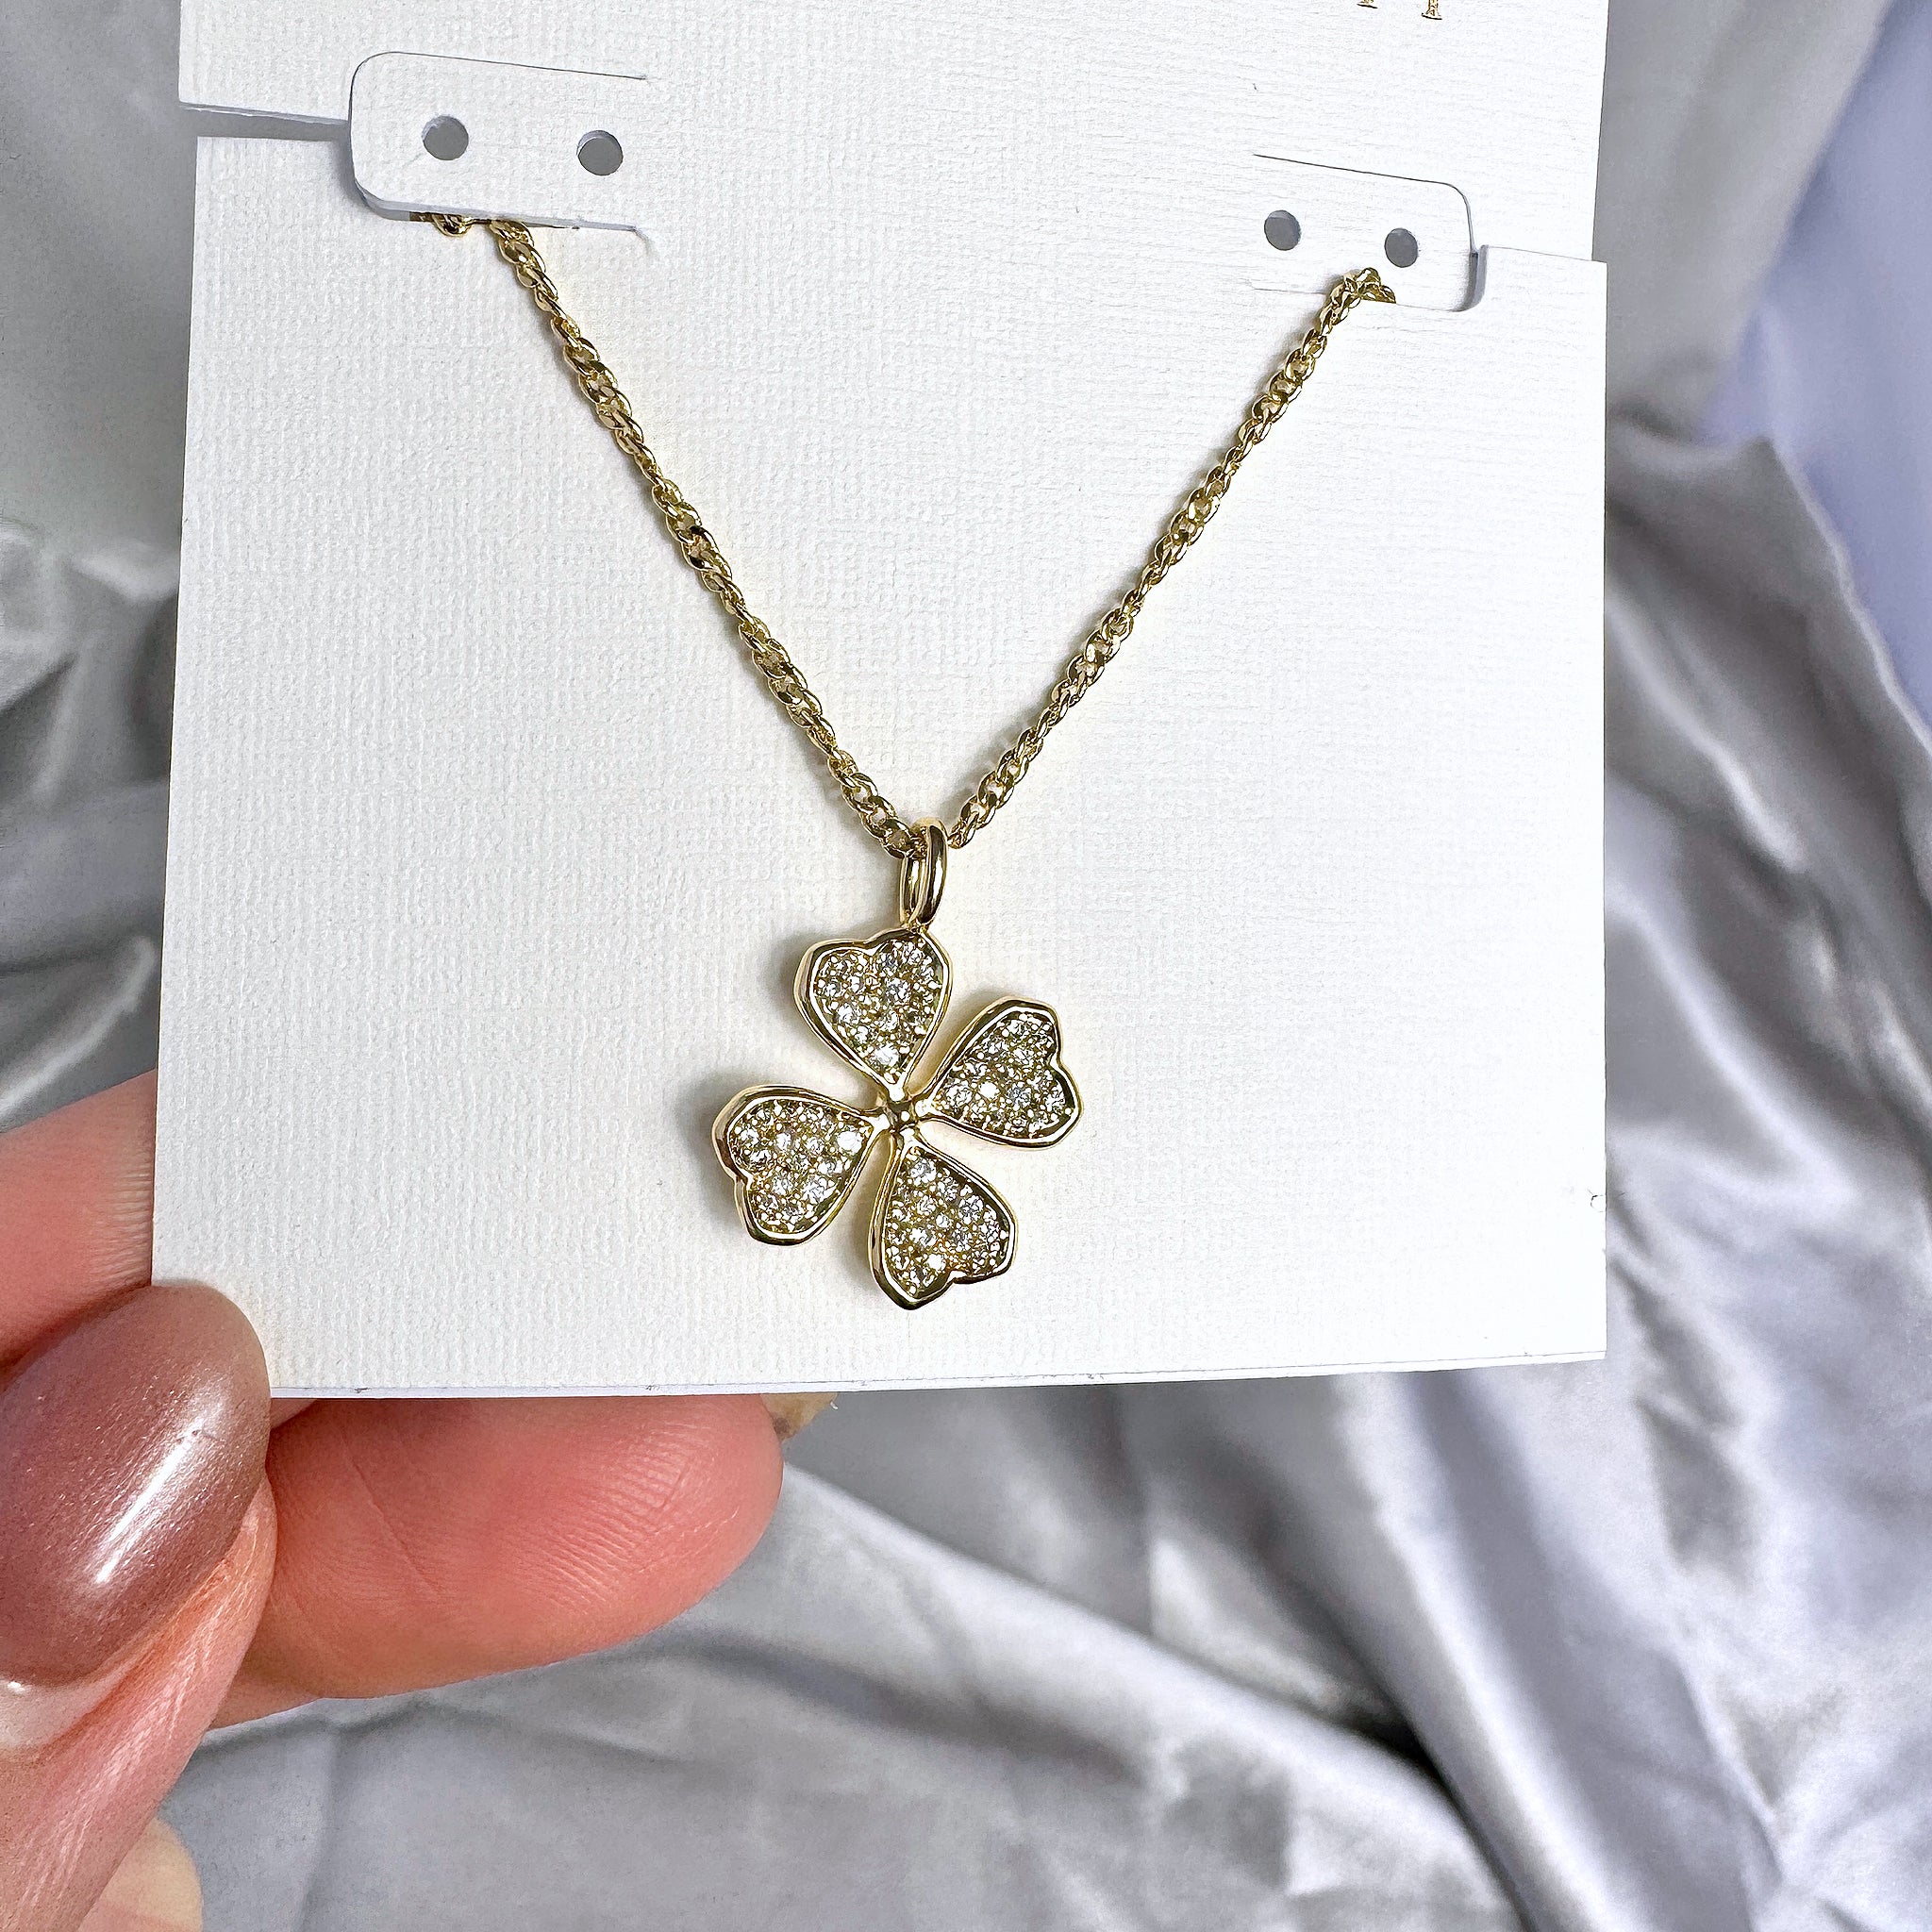 Kendra Scott Clover Pendant Necklace in White Crystal and Gold Plated